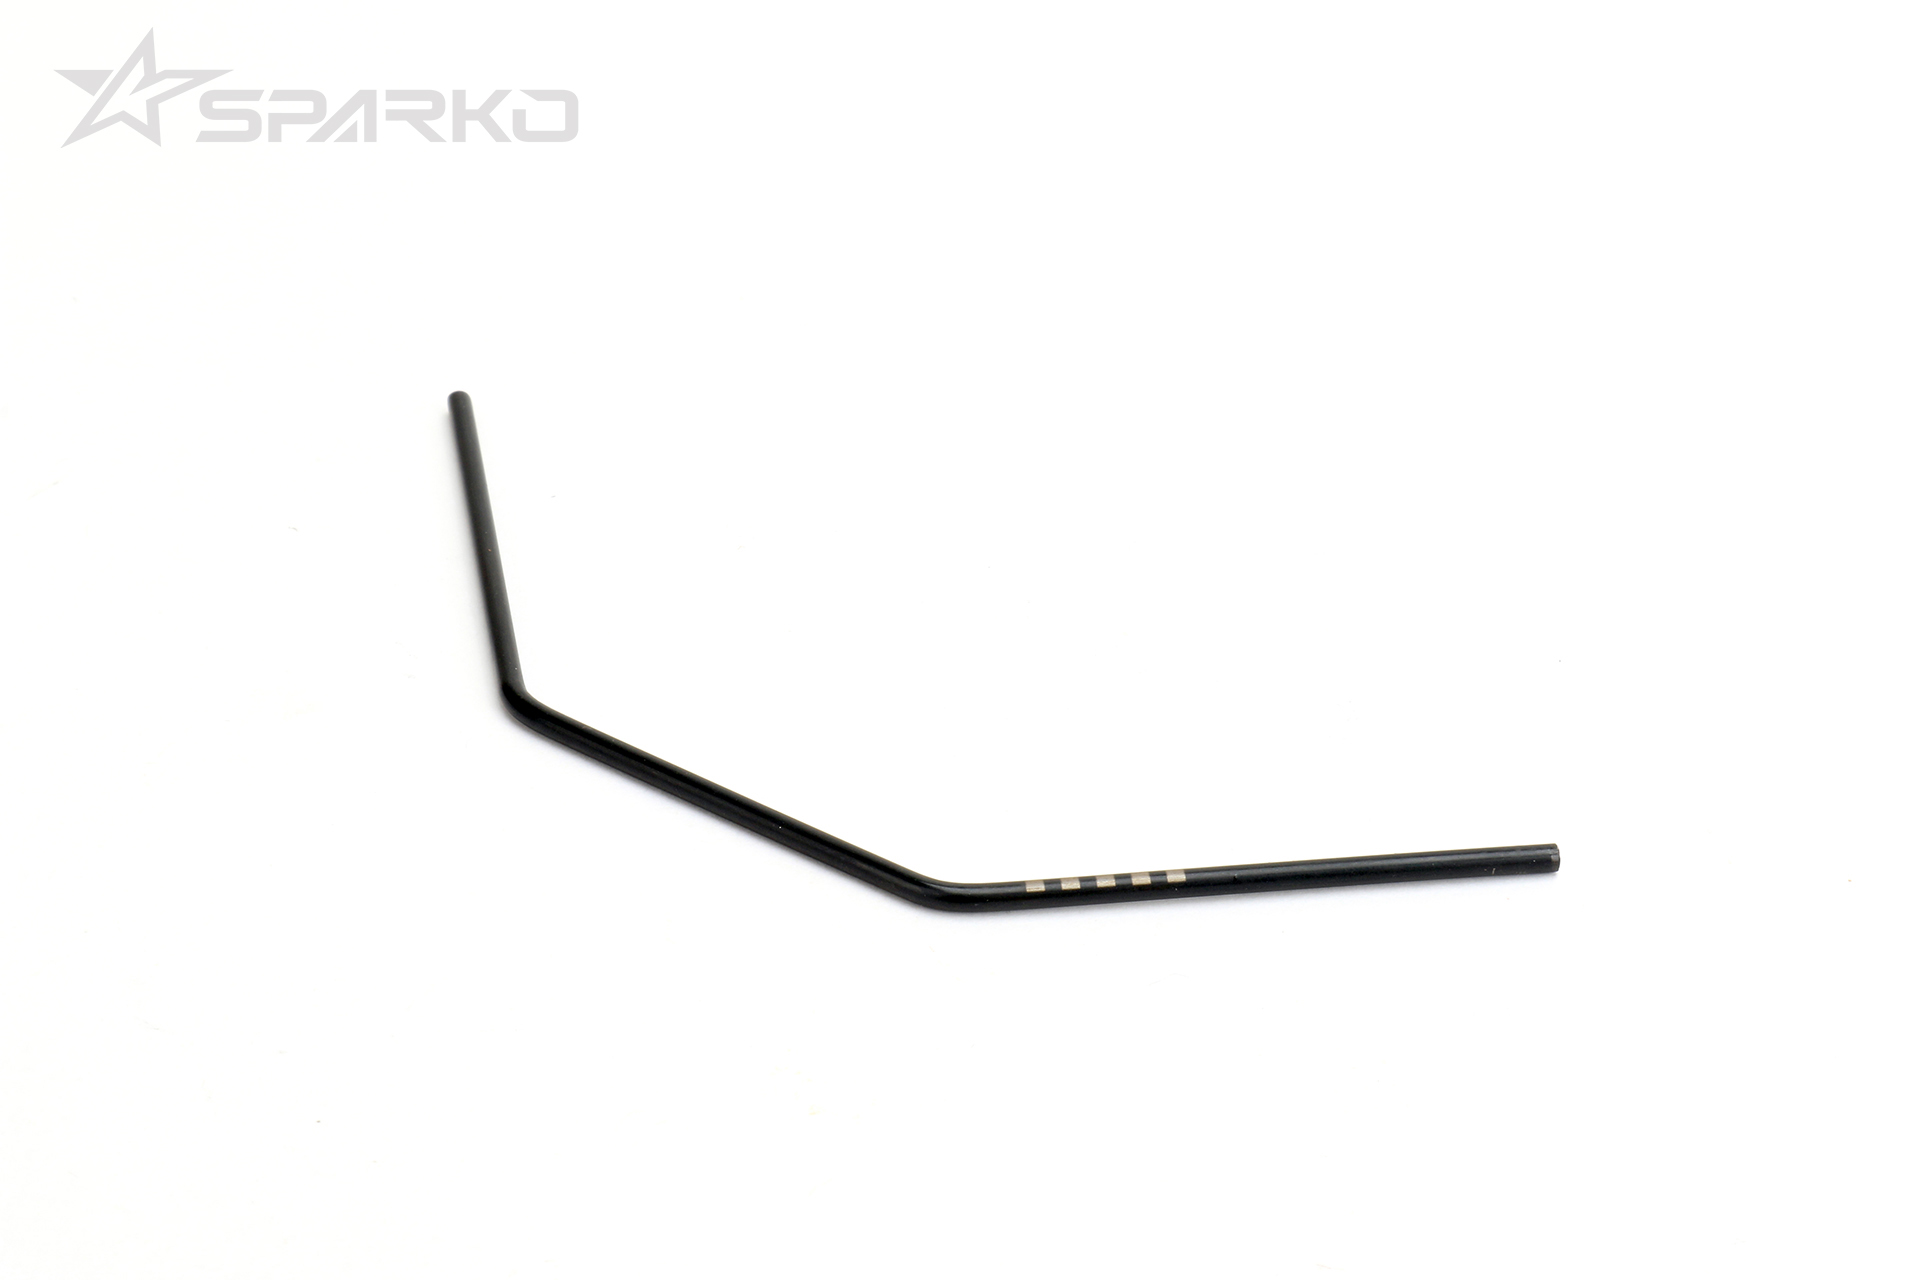 Front Sway Bar 2.5mm